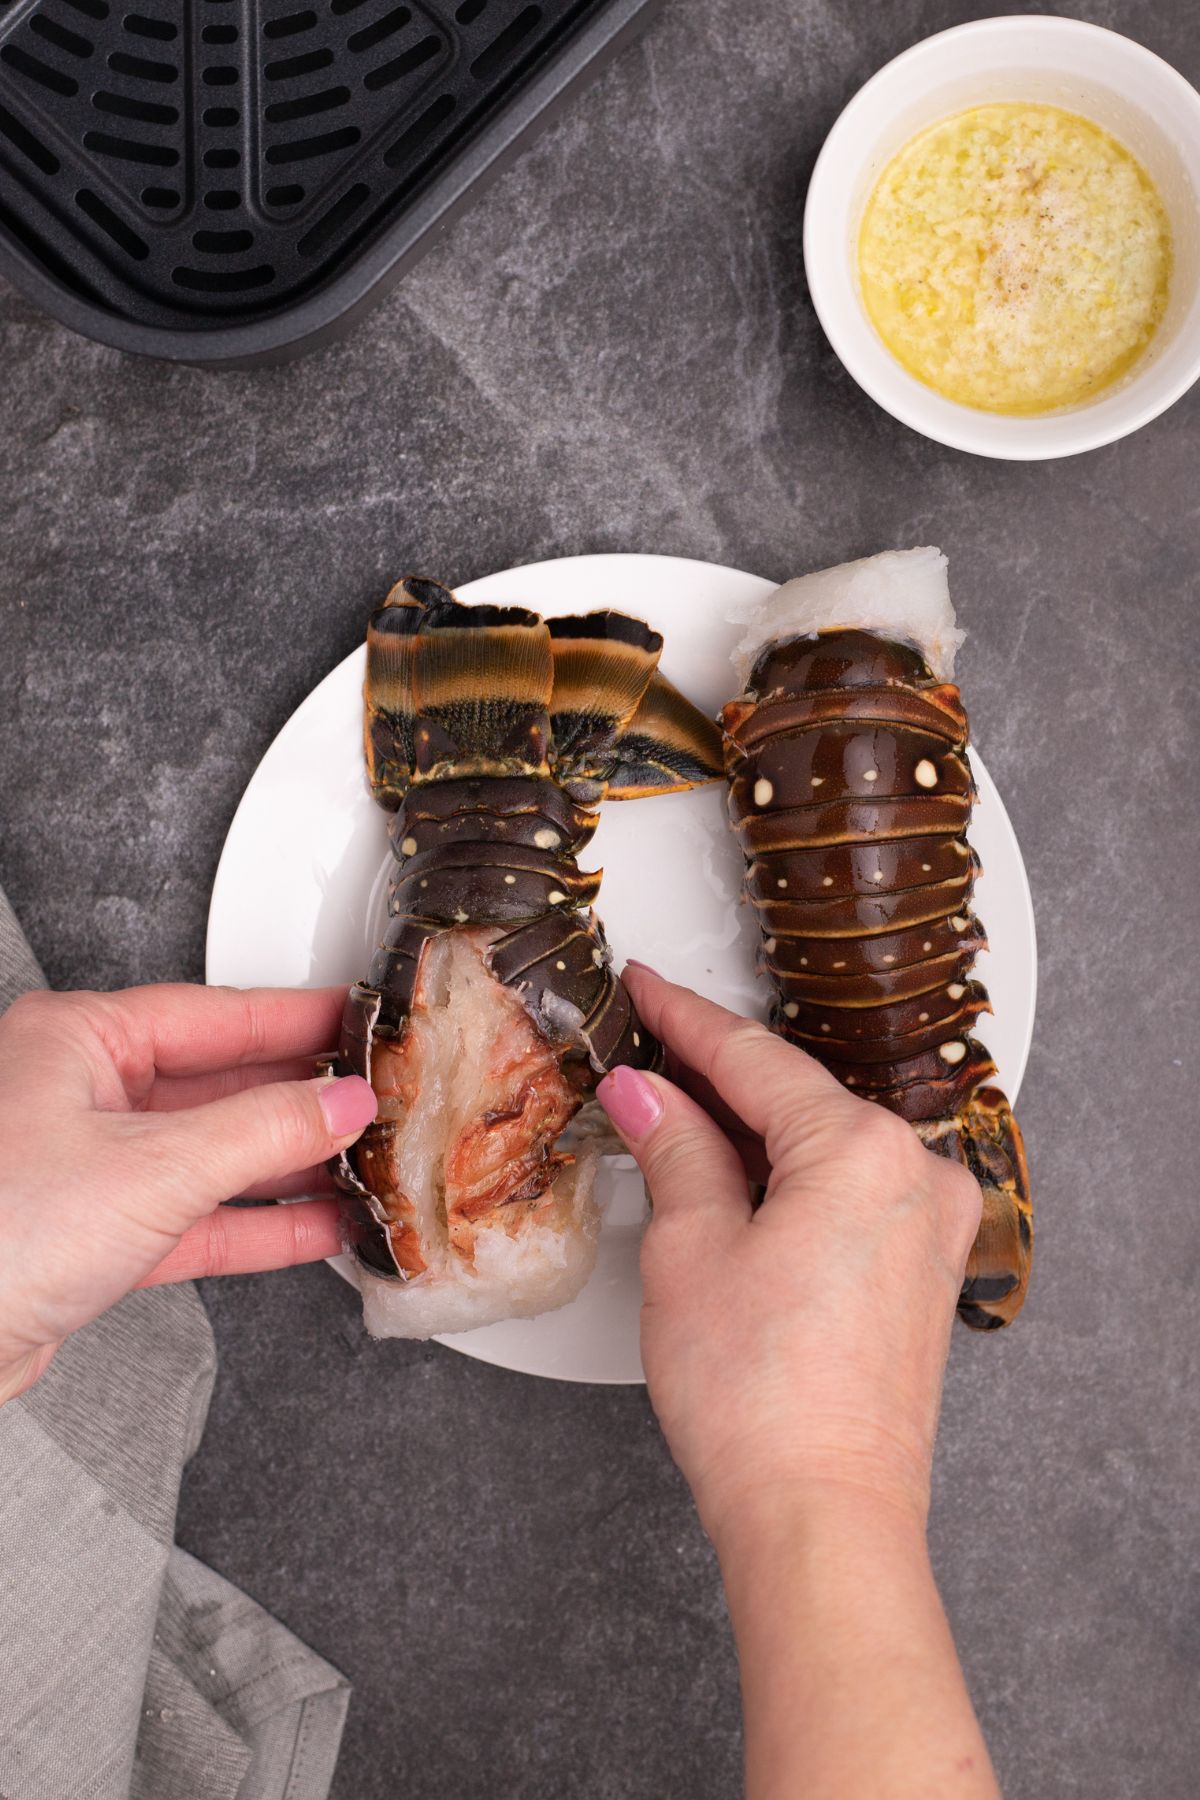 Lobster shells cut open and being pulled apart to get to meat.